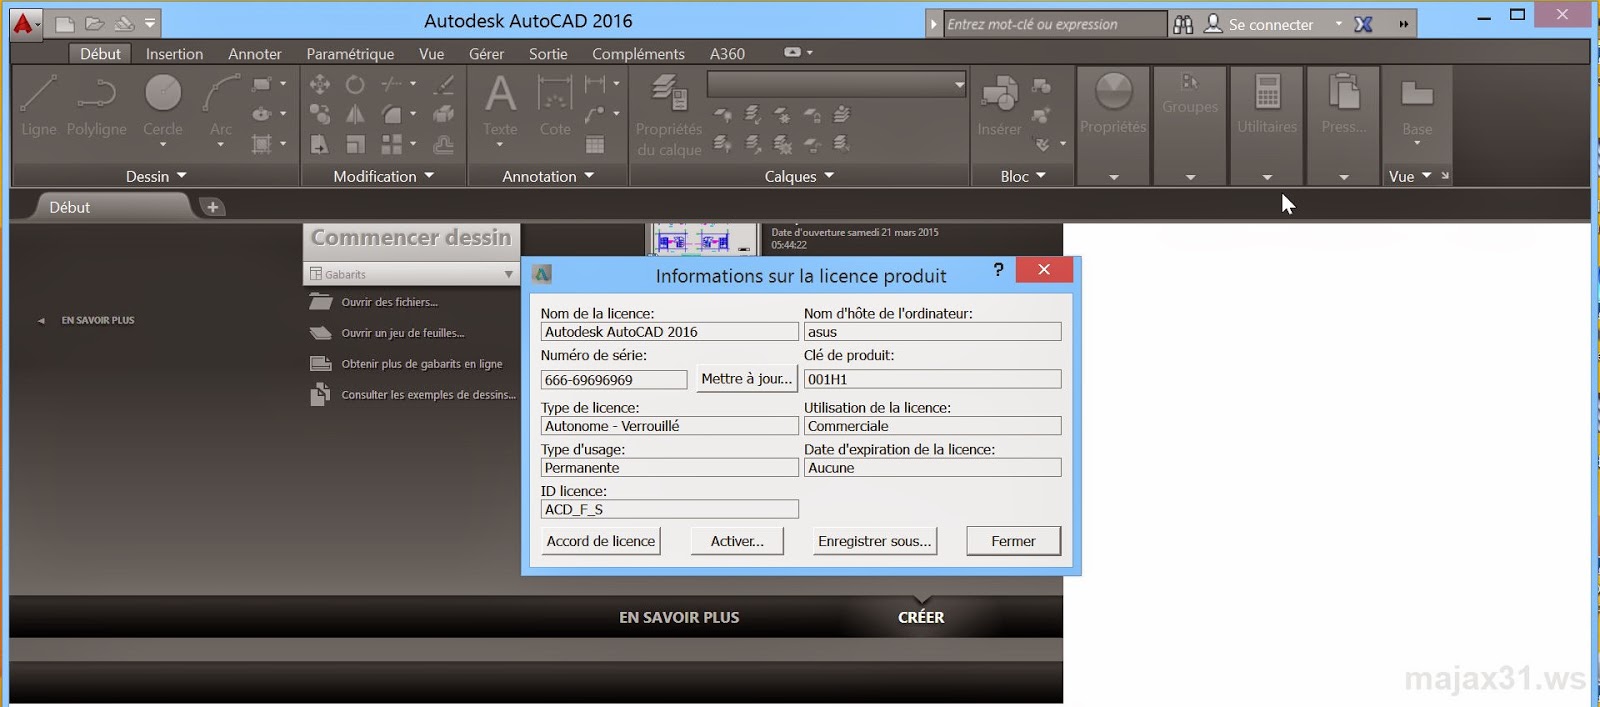 TELECHARGER LE TORRENT AUTOCAD 2014 FRENCH 64 BITS